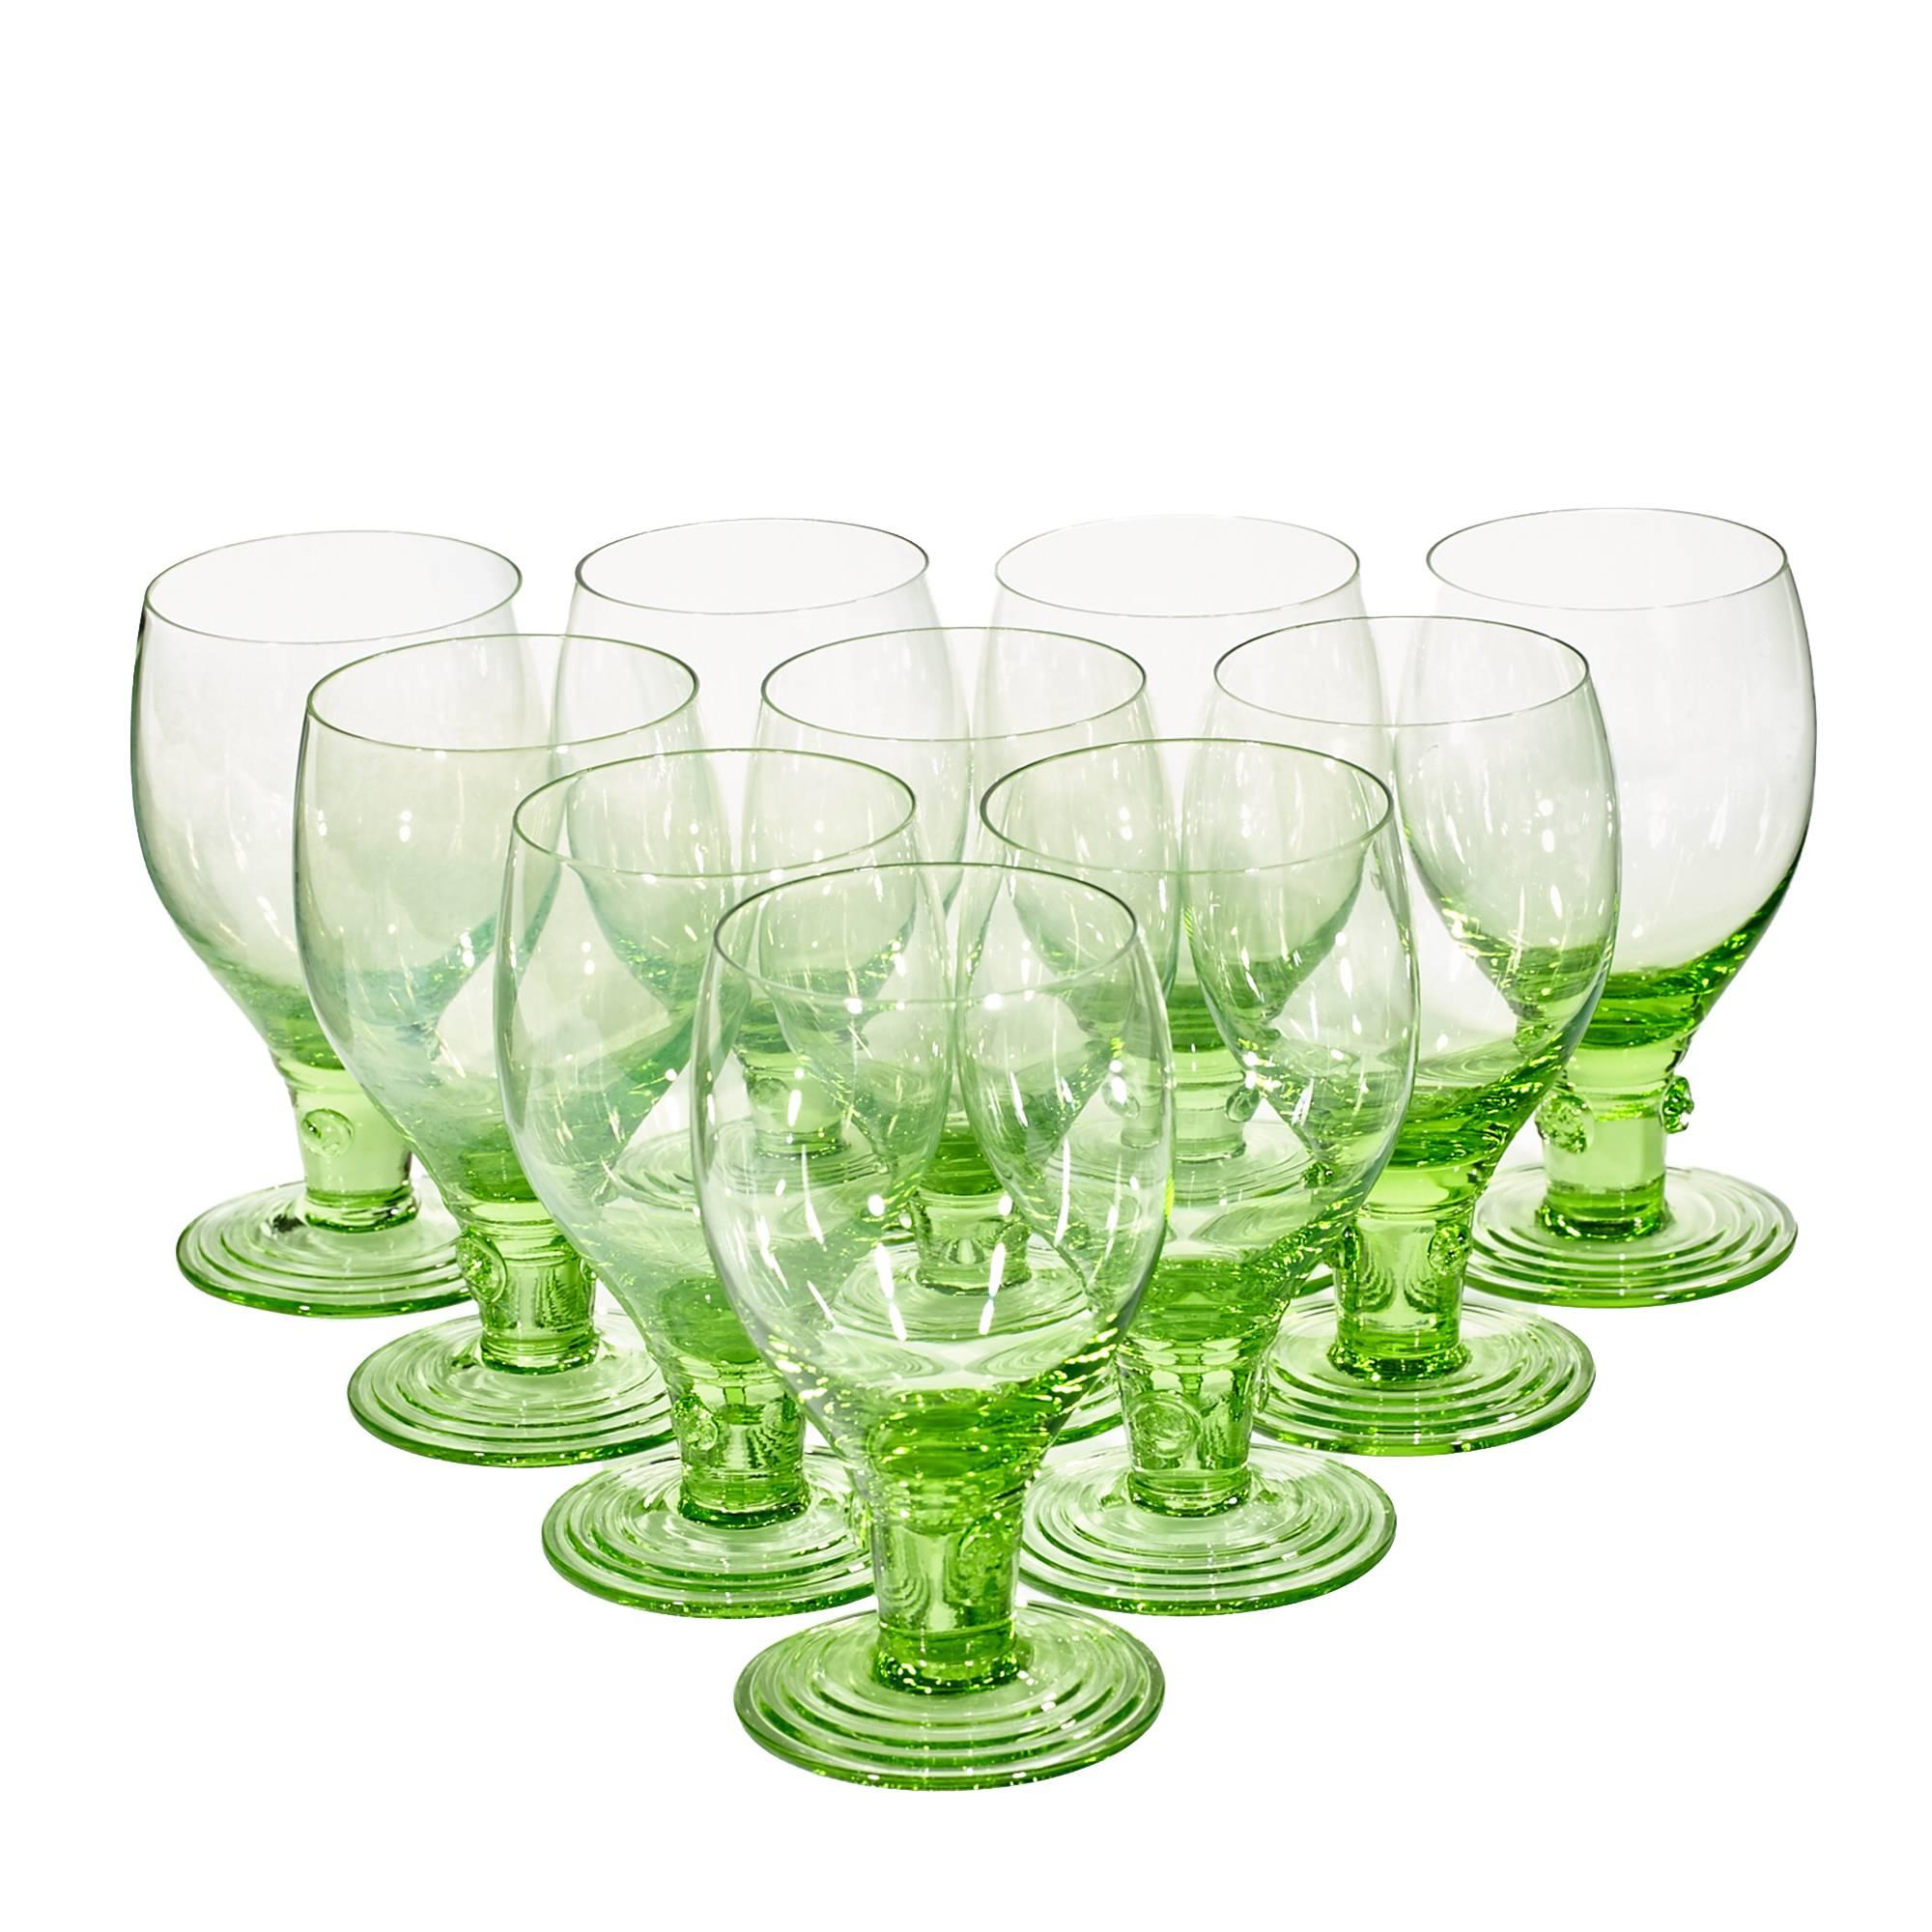 Vintage handblown set of ten-light green glass wine goblets with decorated stems, circa 1950.